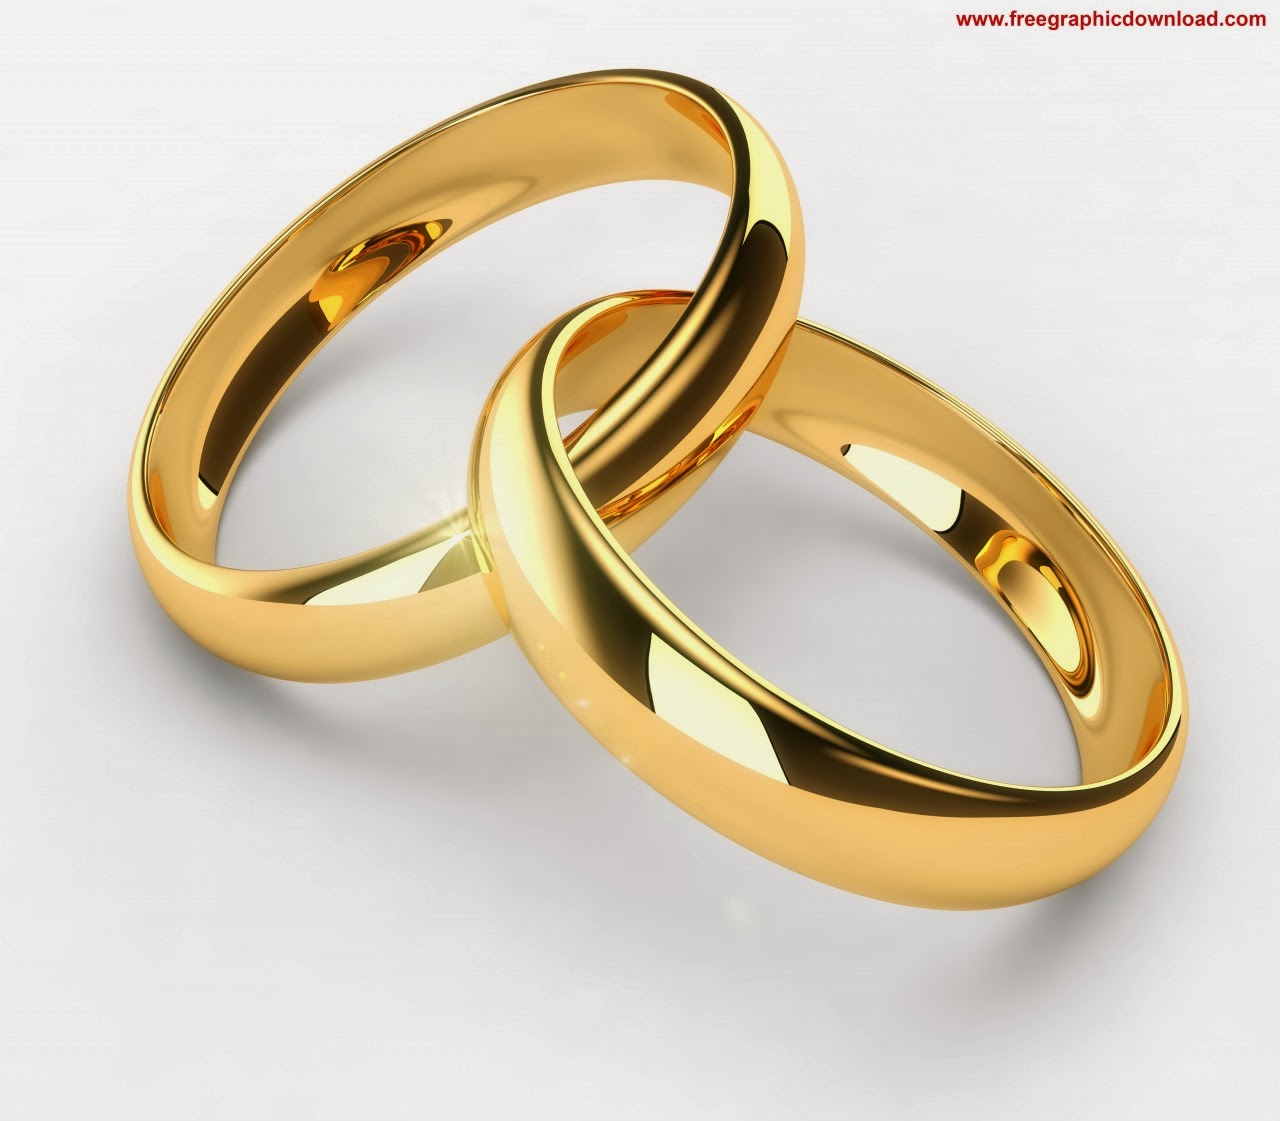 Gold and Diamond ring wallpaper